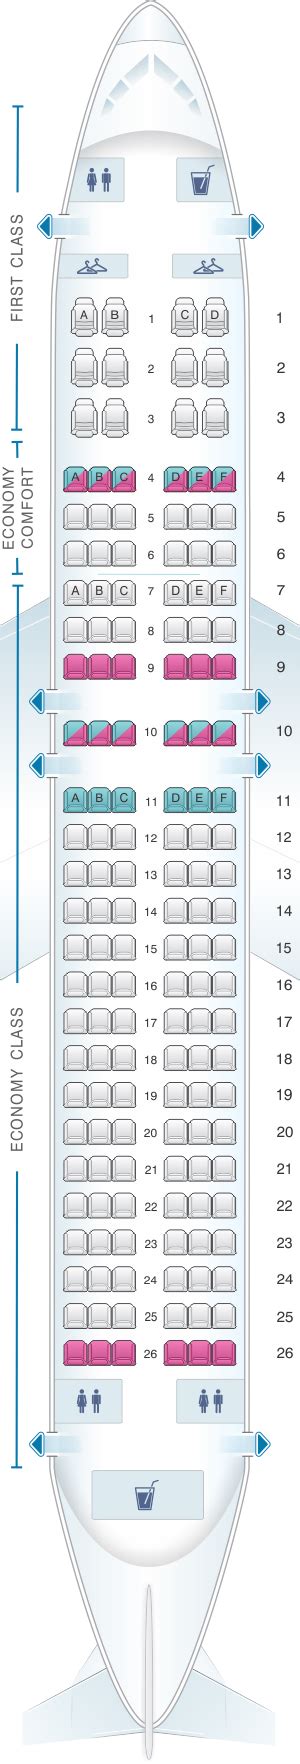 Delta Airlines Seating Chart Airbus A320 Cabinets Matttroy